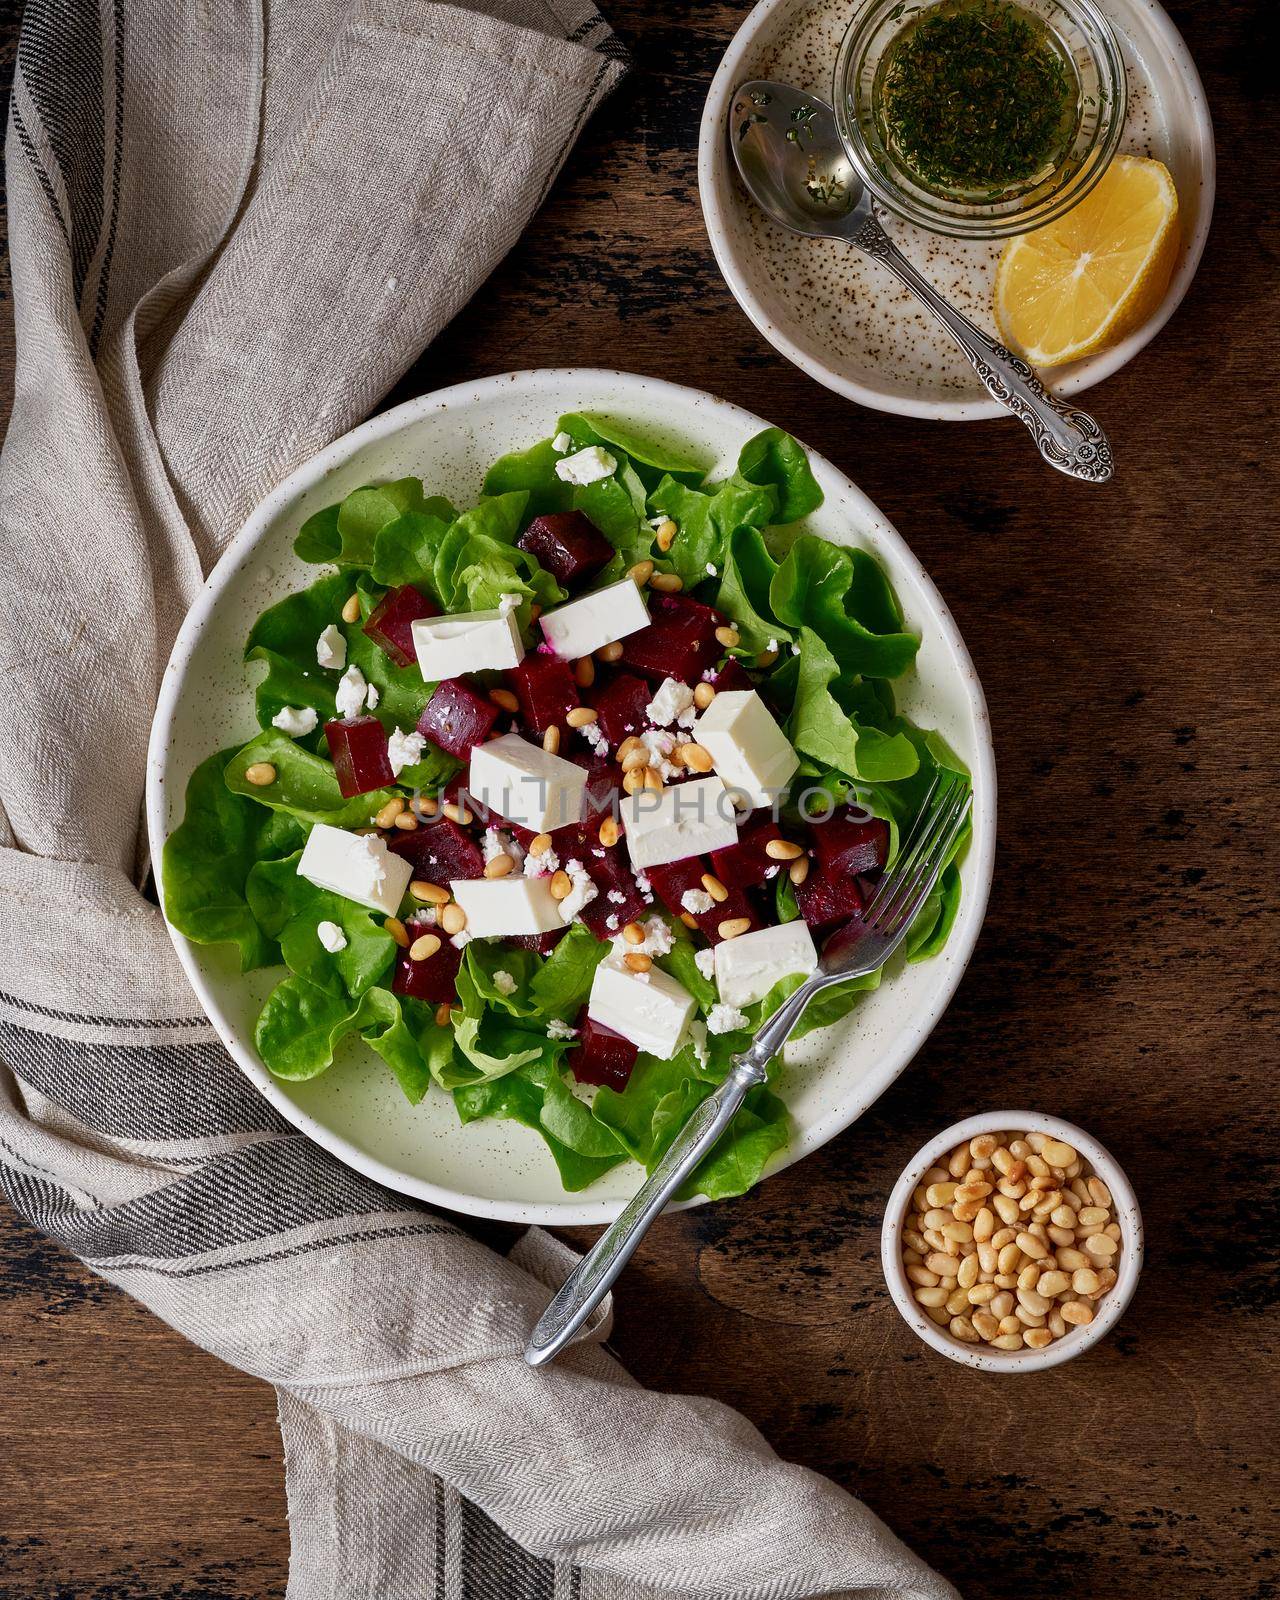 Healthy salad with beet, curd, feta and pine nuts, lettuce. Low carb keto ketogenic dash diet by NataBene